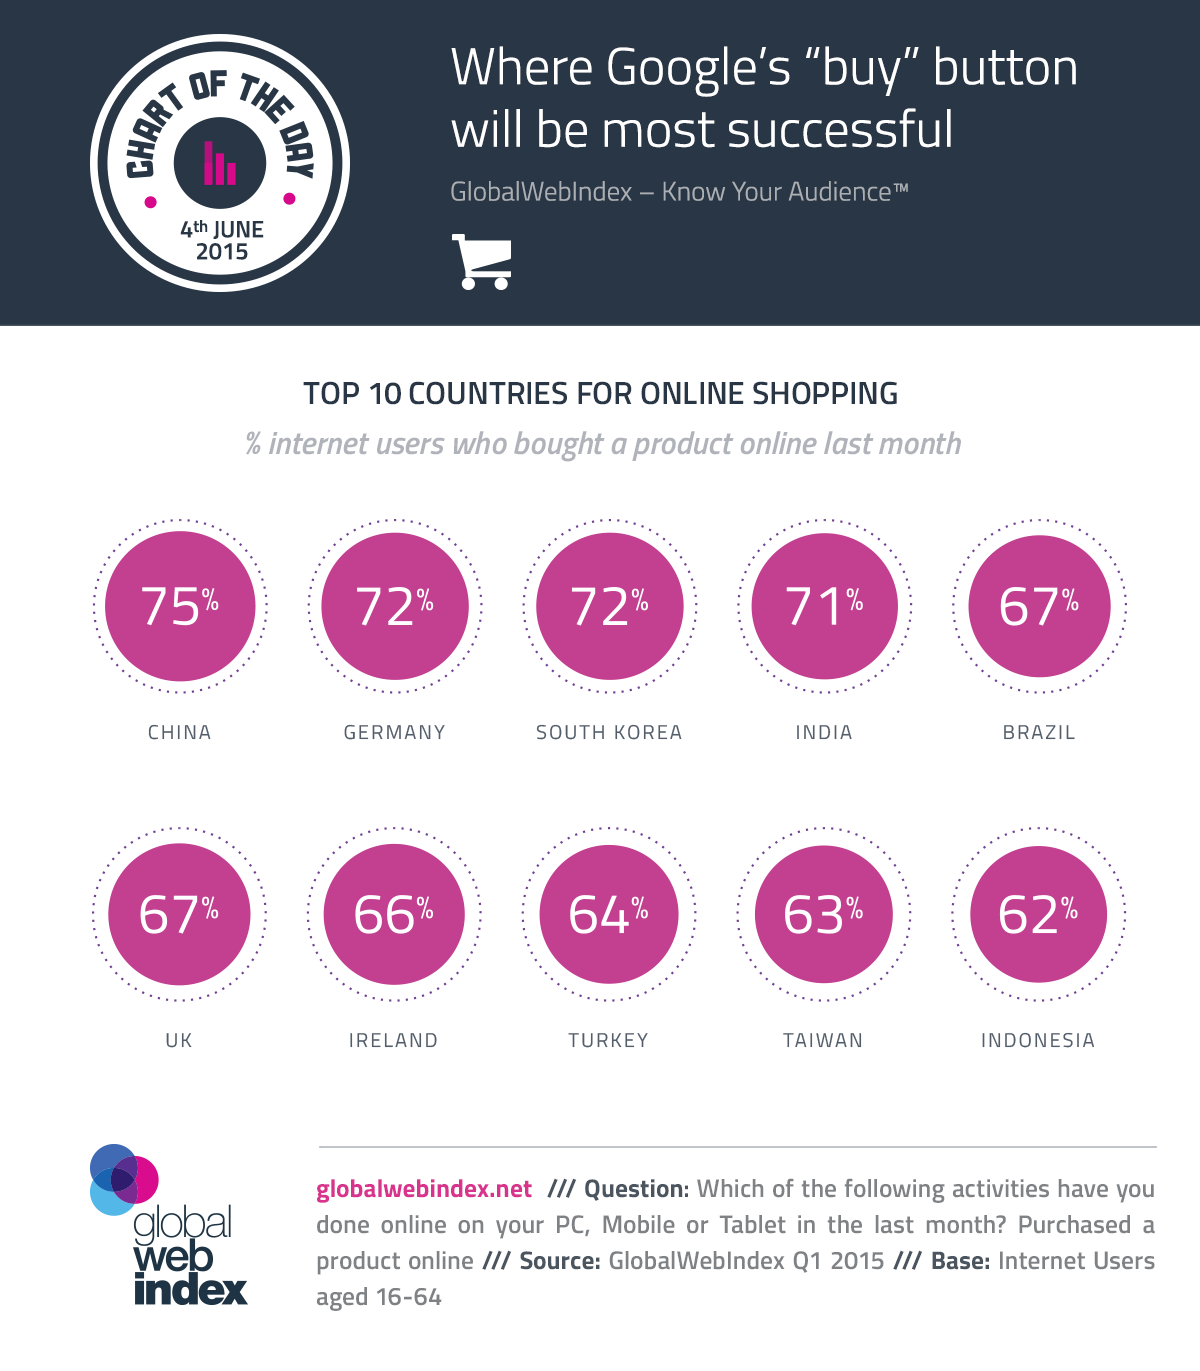 Where Google’s “Buy” Button Will be Most Successful #infographic